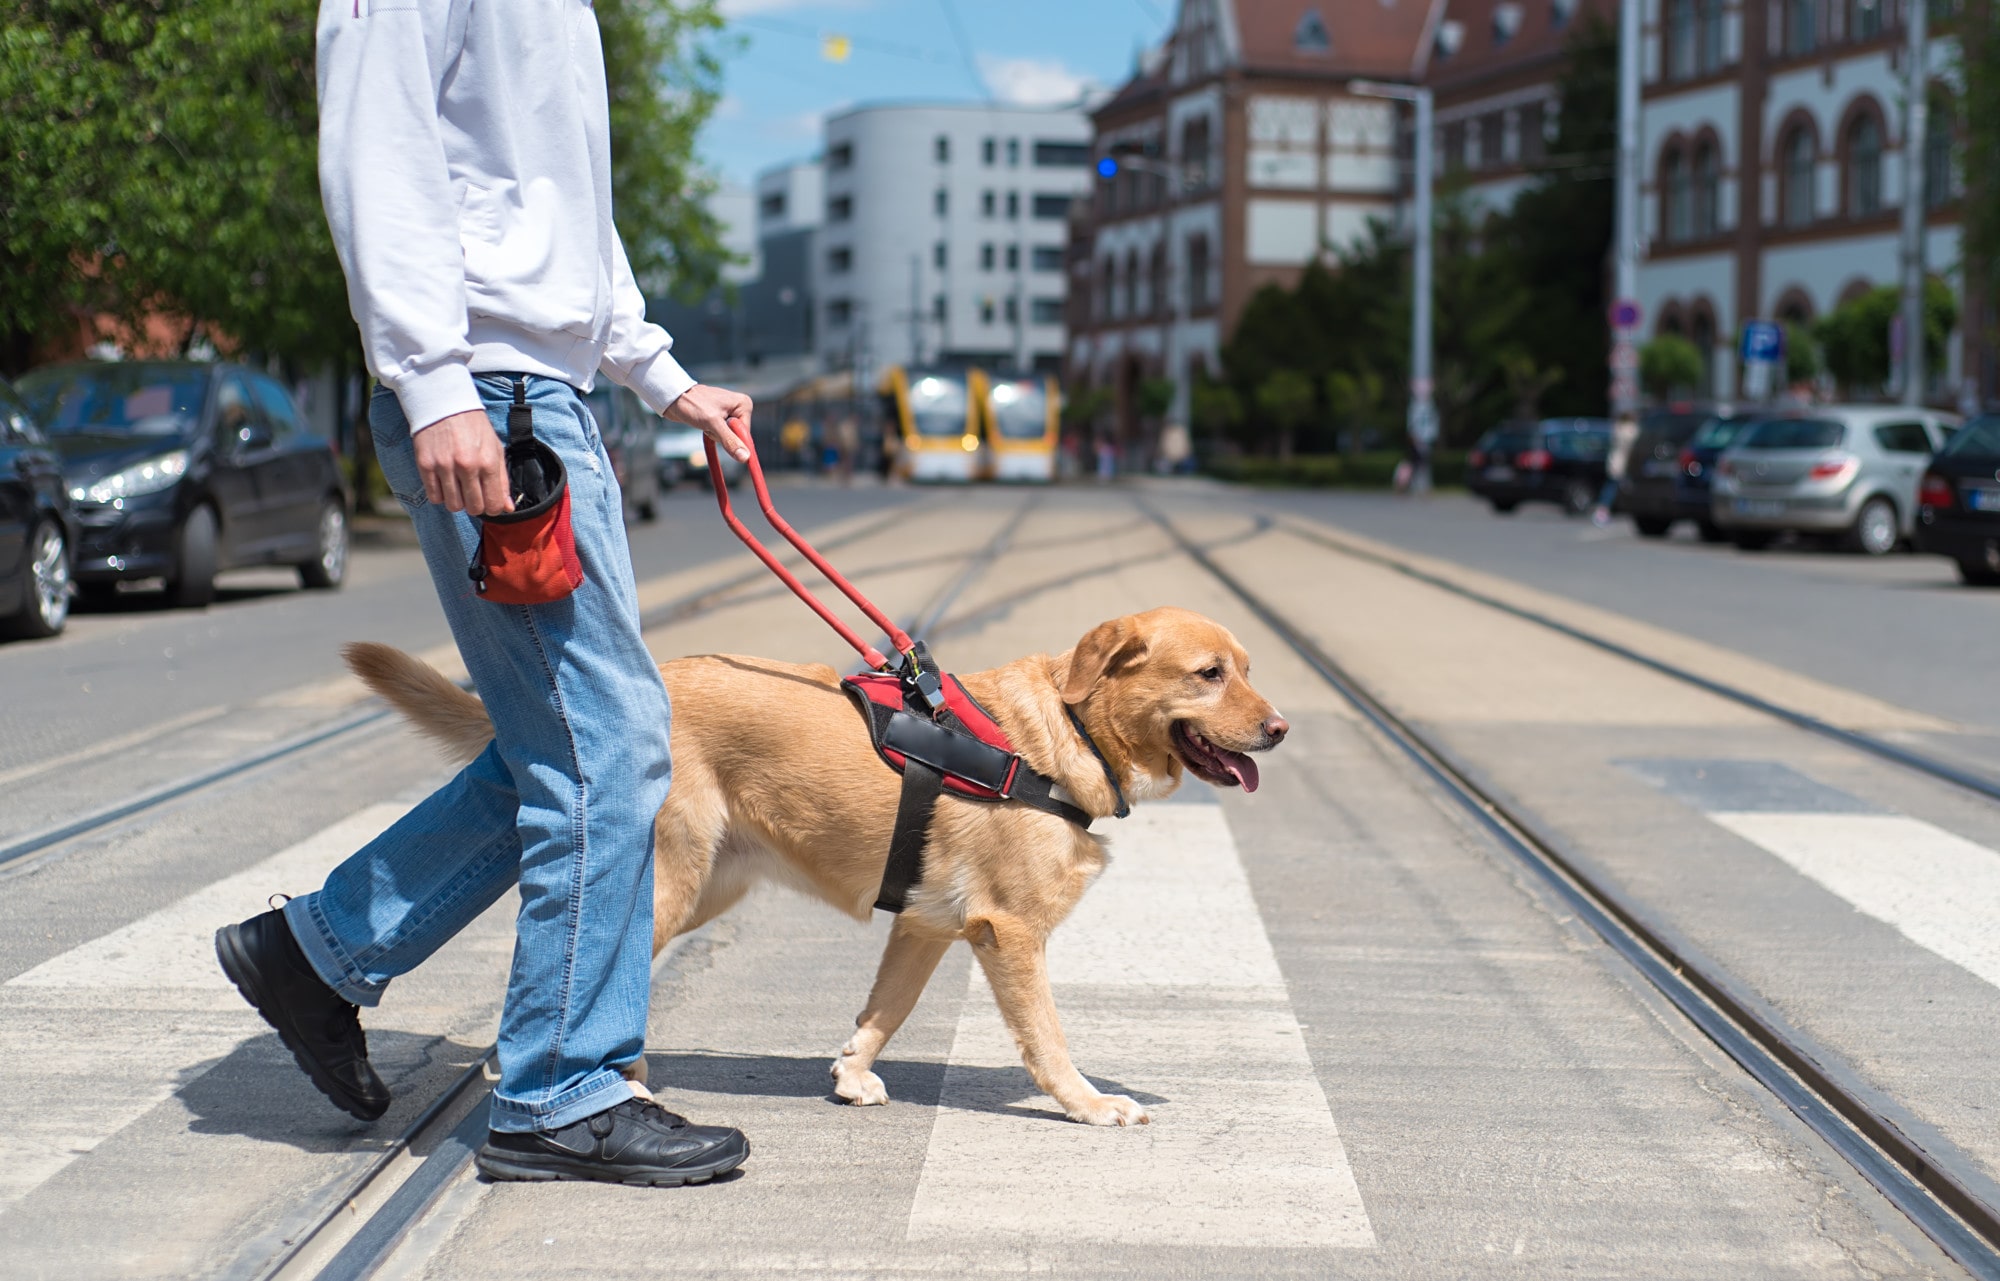 Emotional Support Animal vs. Service Animal vs. Pet: A Guide for Landlords